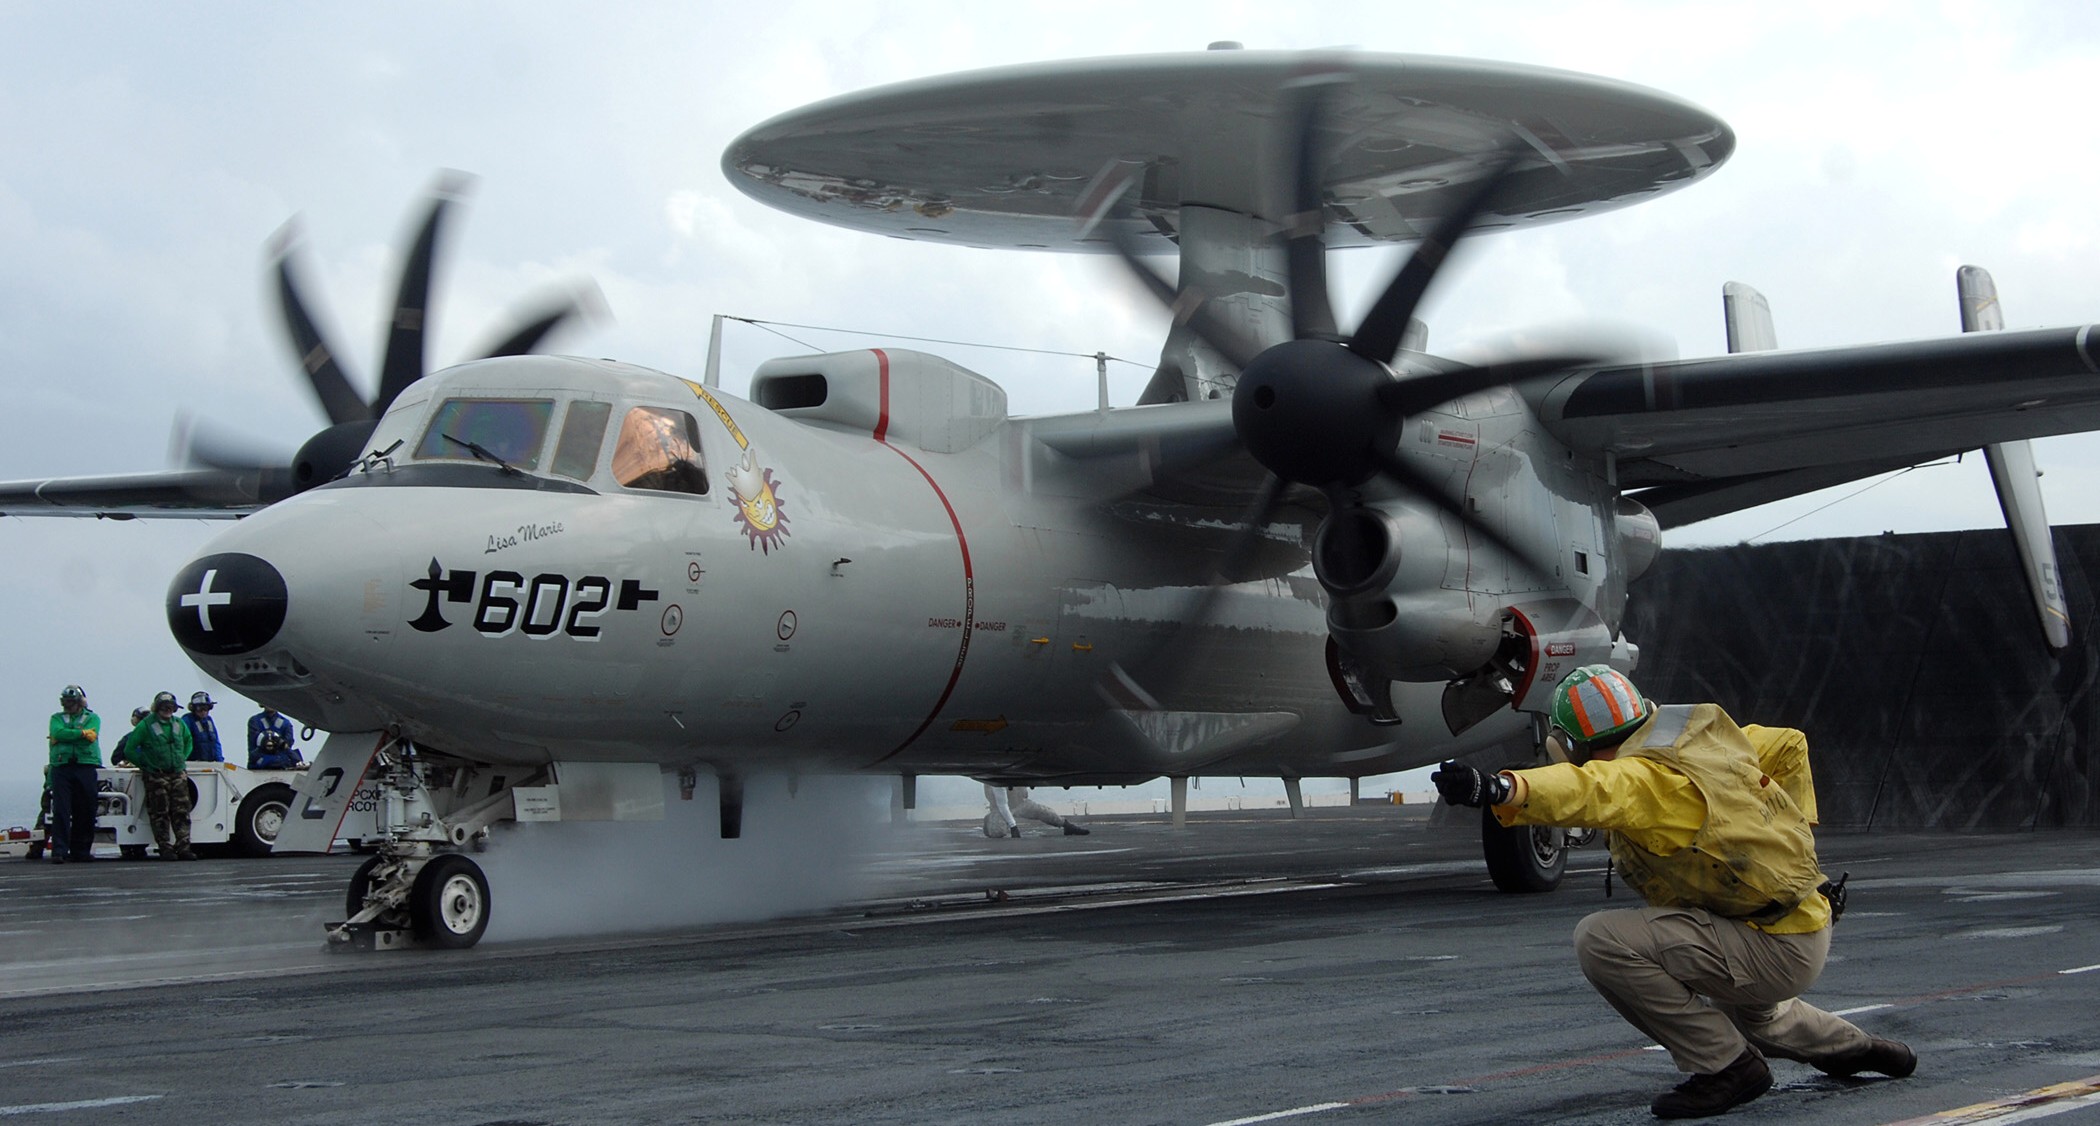 vaw-116 sun kings airborne command control squadron carrier early warning cvw-2 uss harry s. truman cvn-75 13